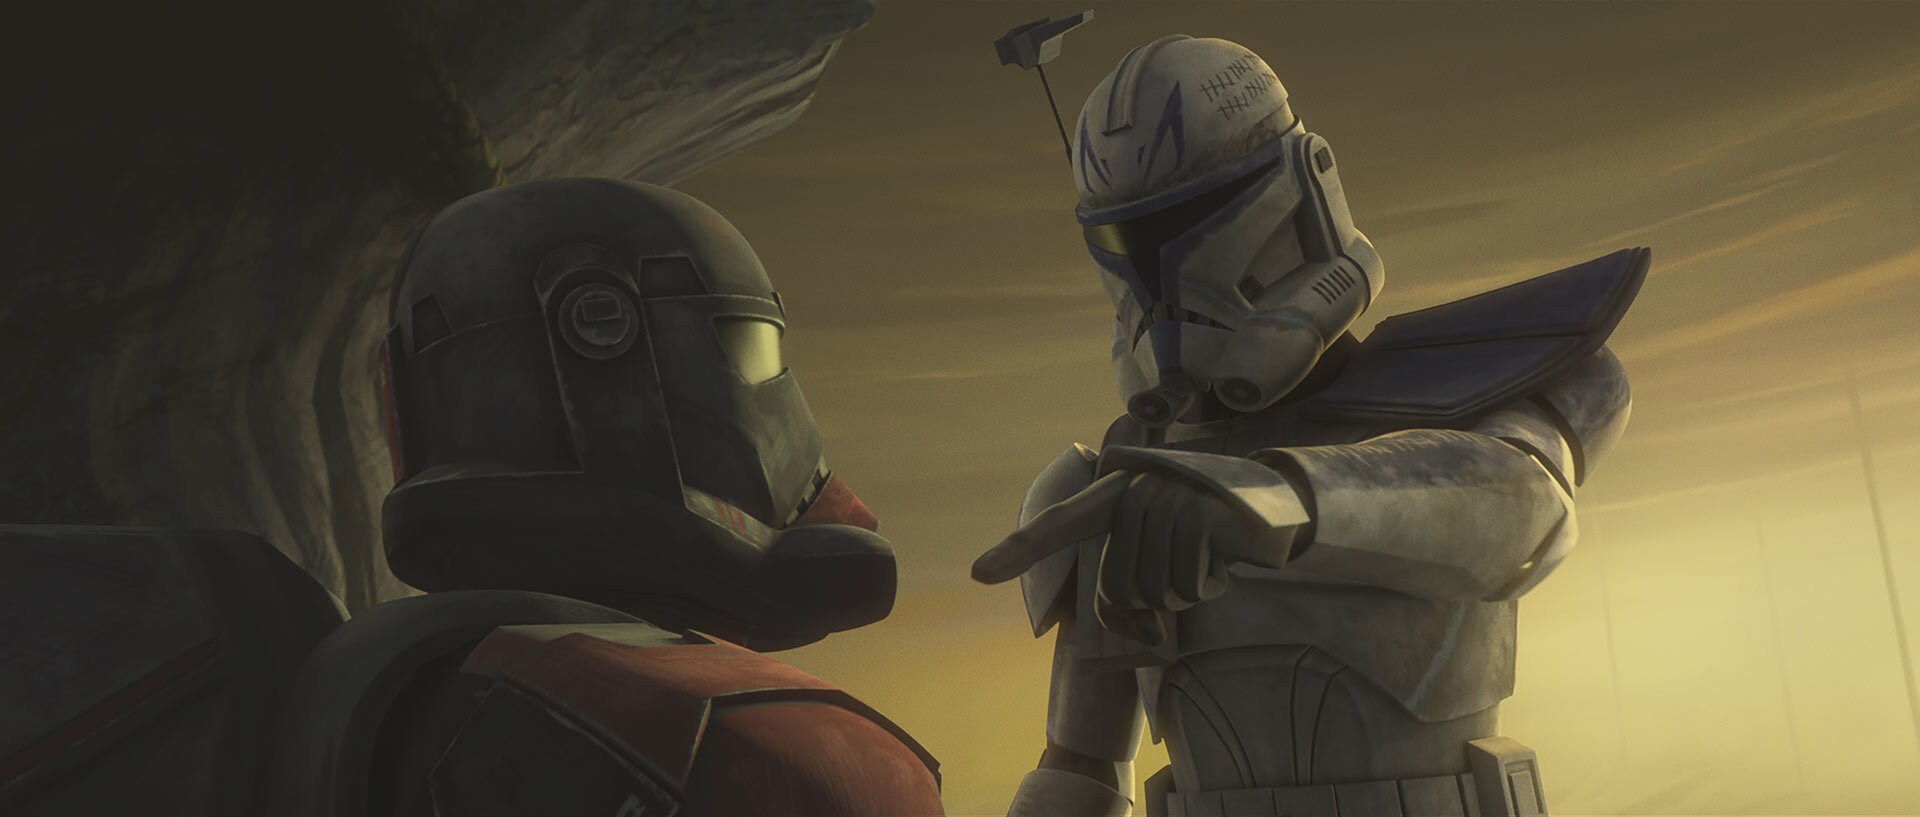 The clones near the Separatist camp...but lose Echo's signal. The weight of the mission taking it...